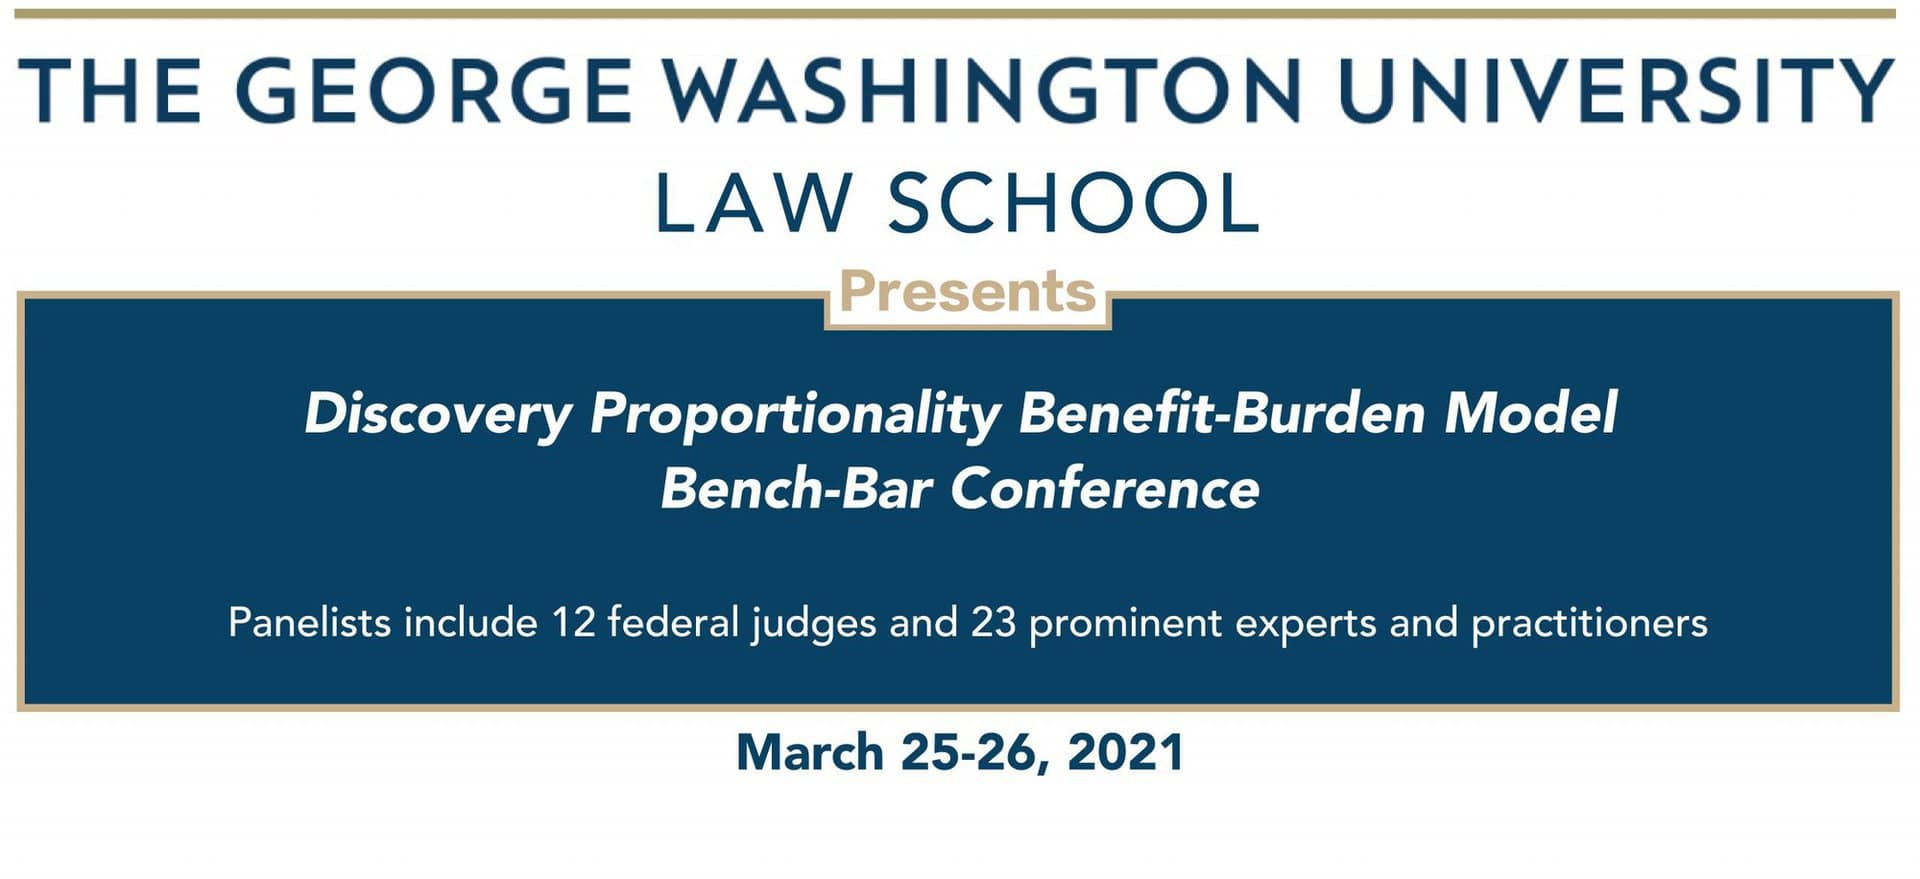 GW Discovery Proportionality Benefit-Burden Model Bench-Bar Conference